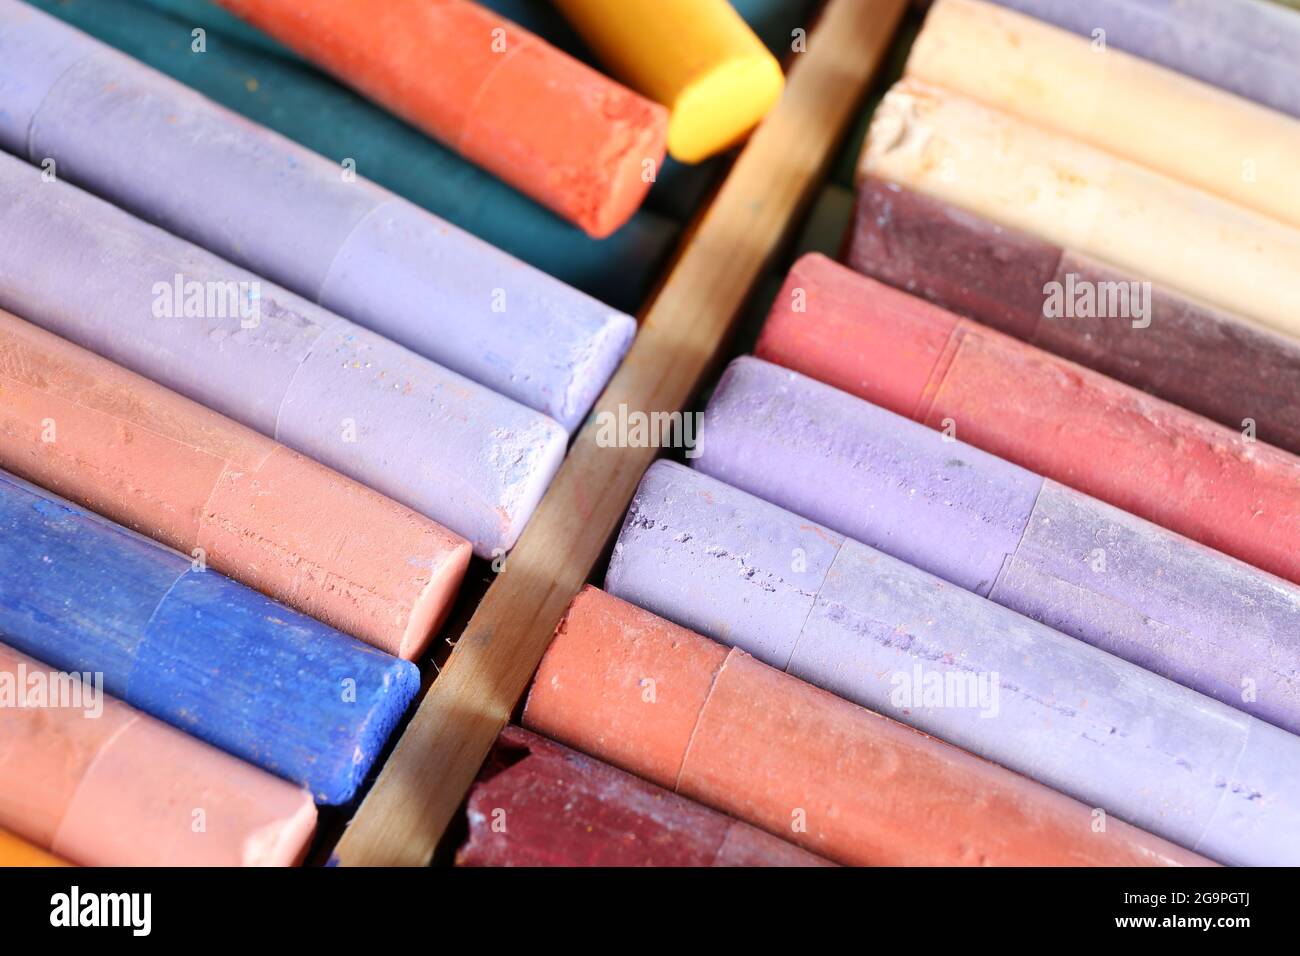 A close up photograph of a box of colorful used chalk pastels